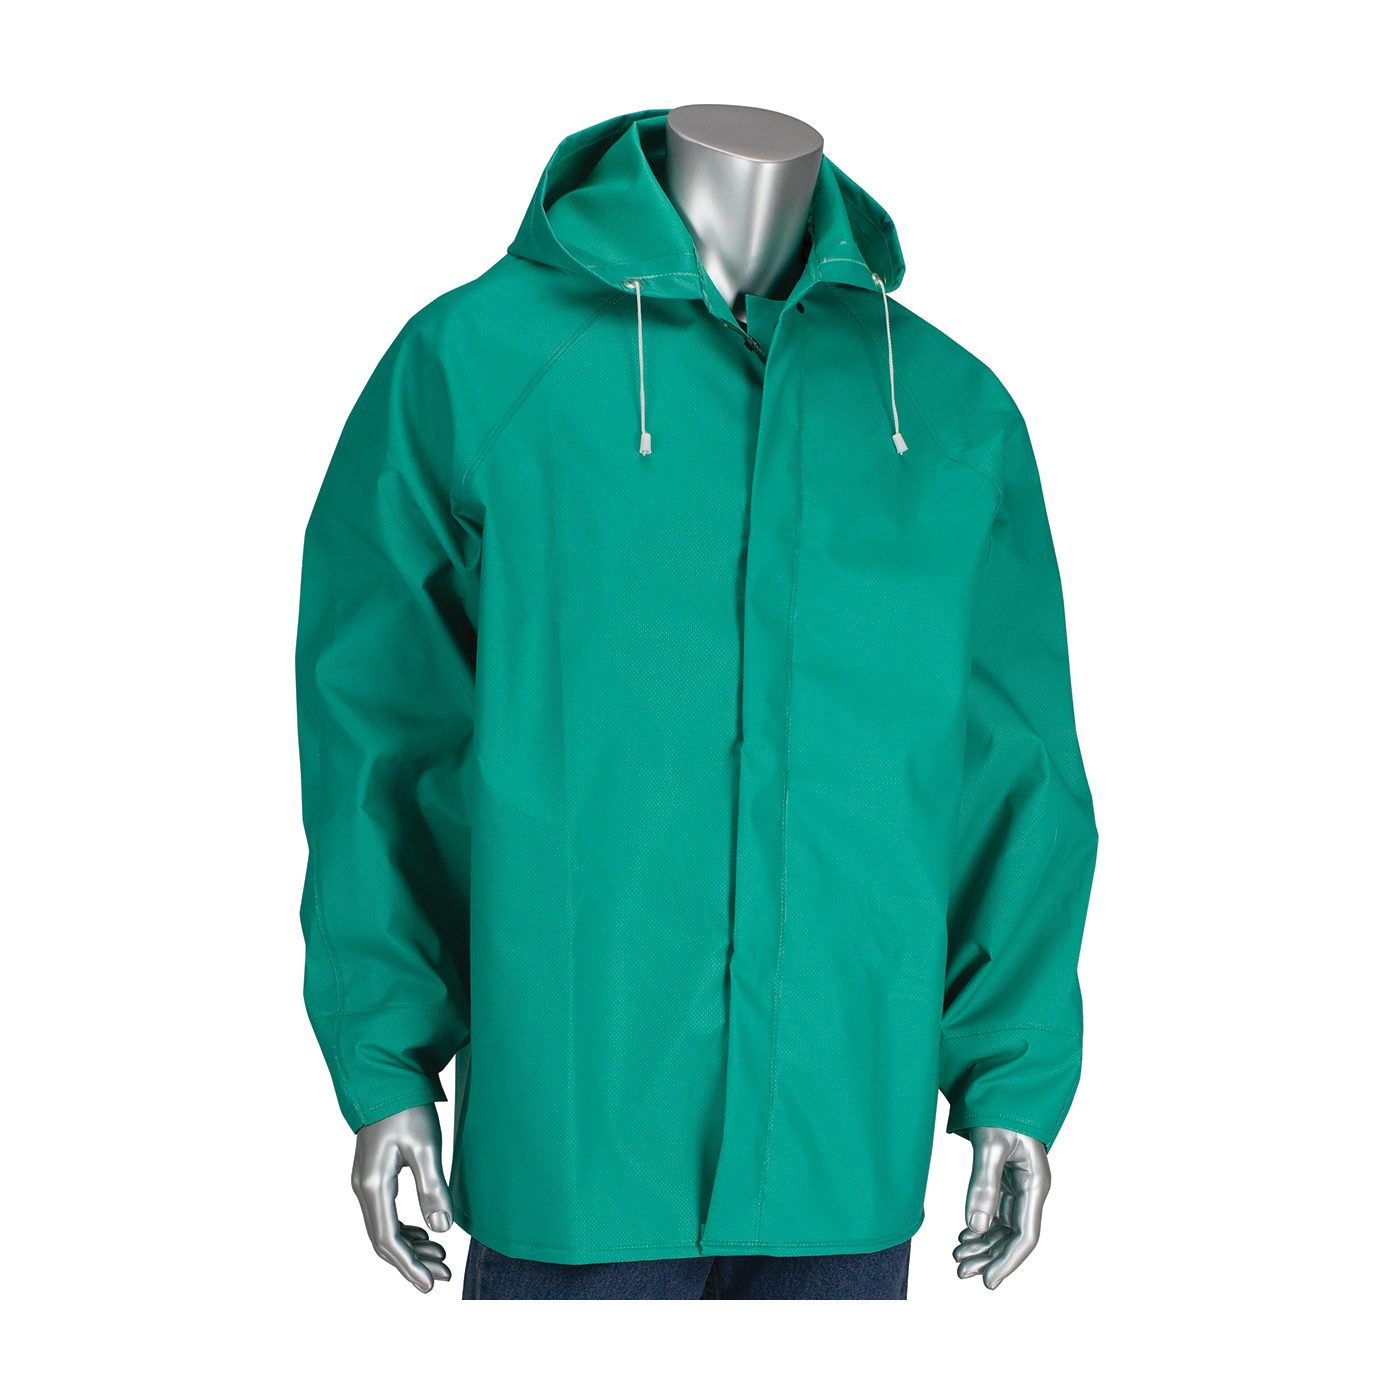 PIP® FALCON™ ChemFR™ 205-420JH/L Rain Jacket With Hood, L, Green, Nylon/PVC, Resists: Flame and Water, ASTM D6413